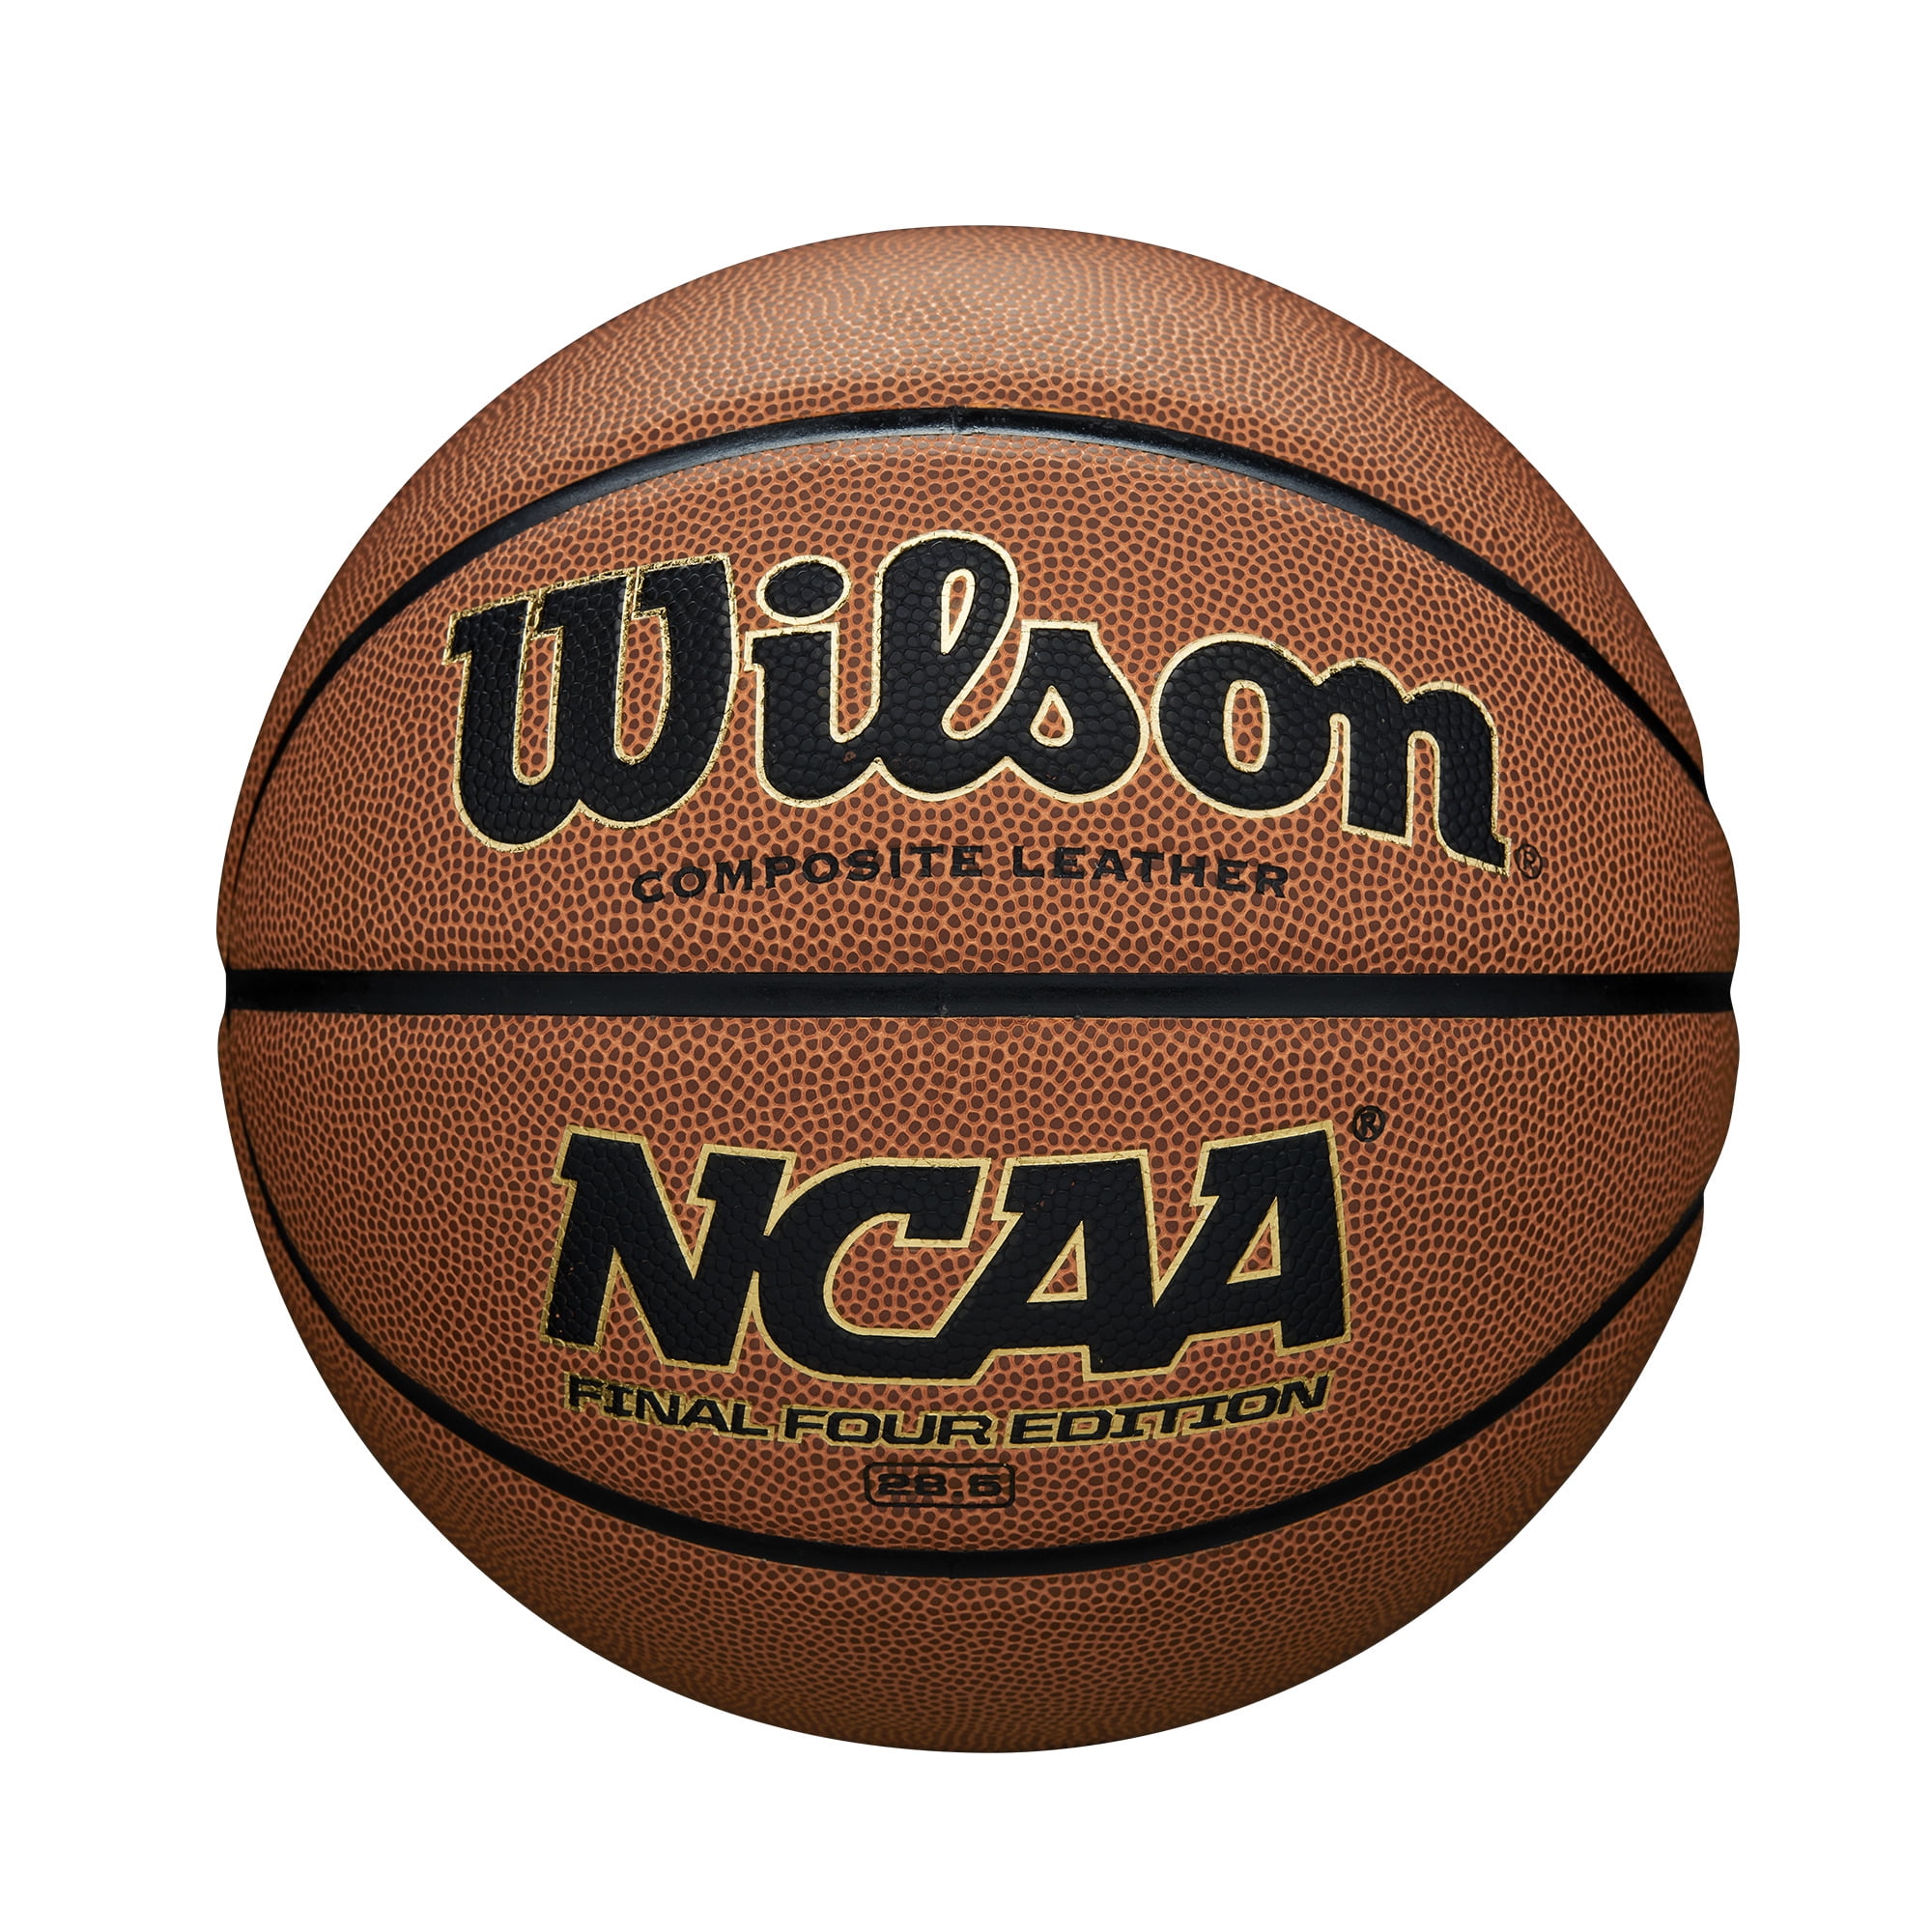 Wilson NCAA Dynasty 29.5 Basketball Size 7 for sale online 